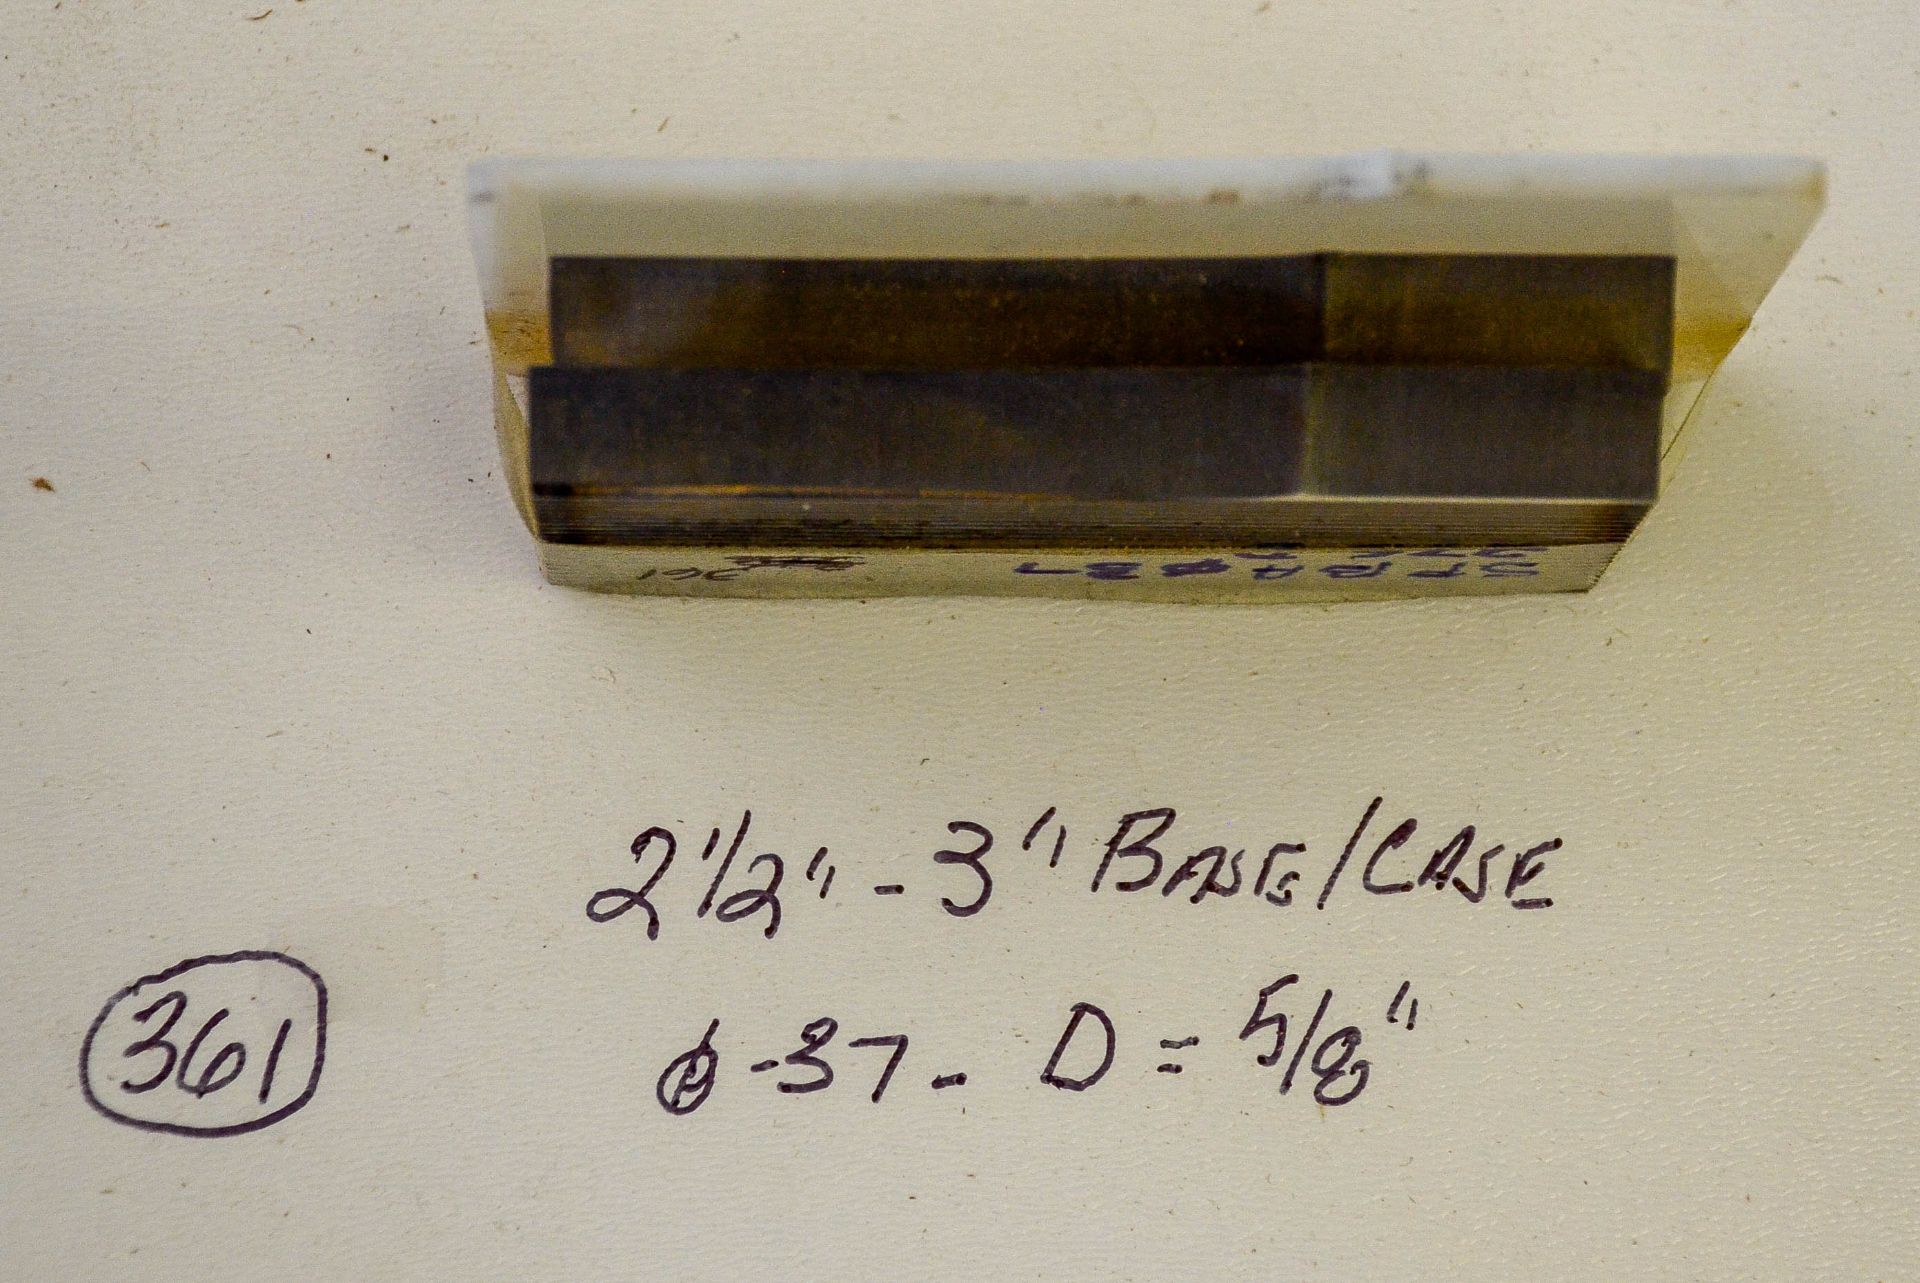 Moulding Knives, 2-1/2"- 3" Base/Case, 0 - 37 - D =5/8", Dull, Knives are in Good Condition and - Image 2 of 2